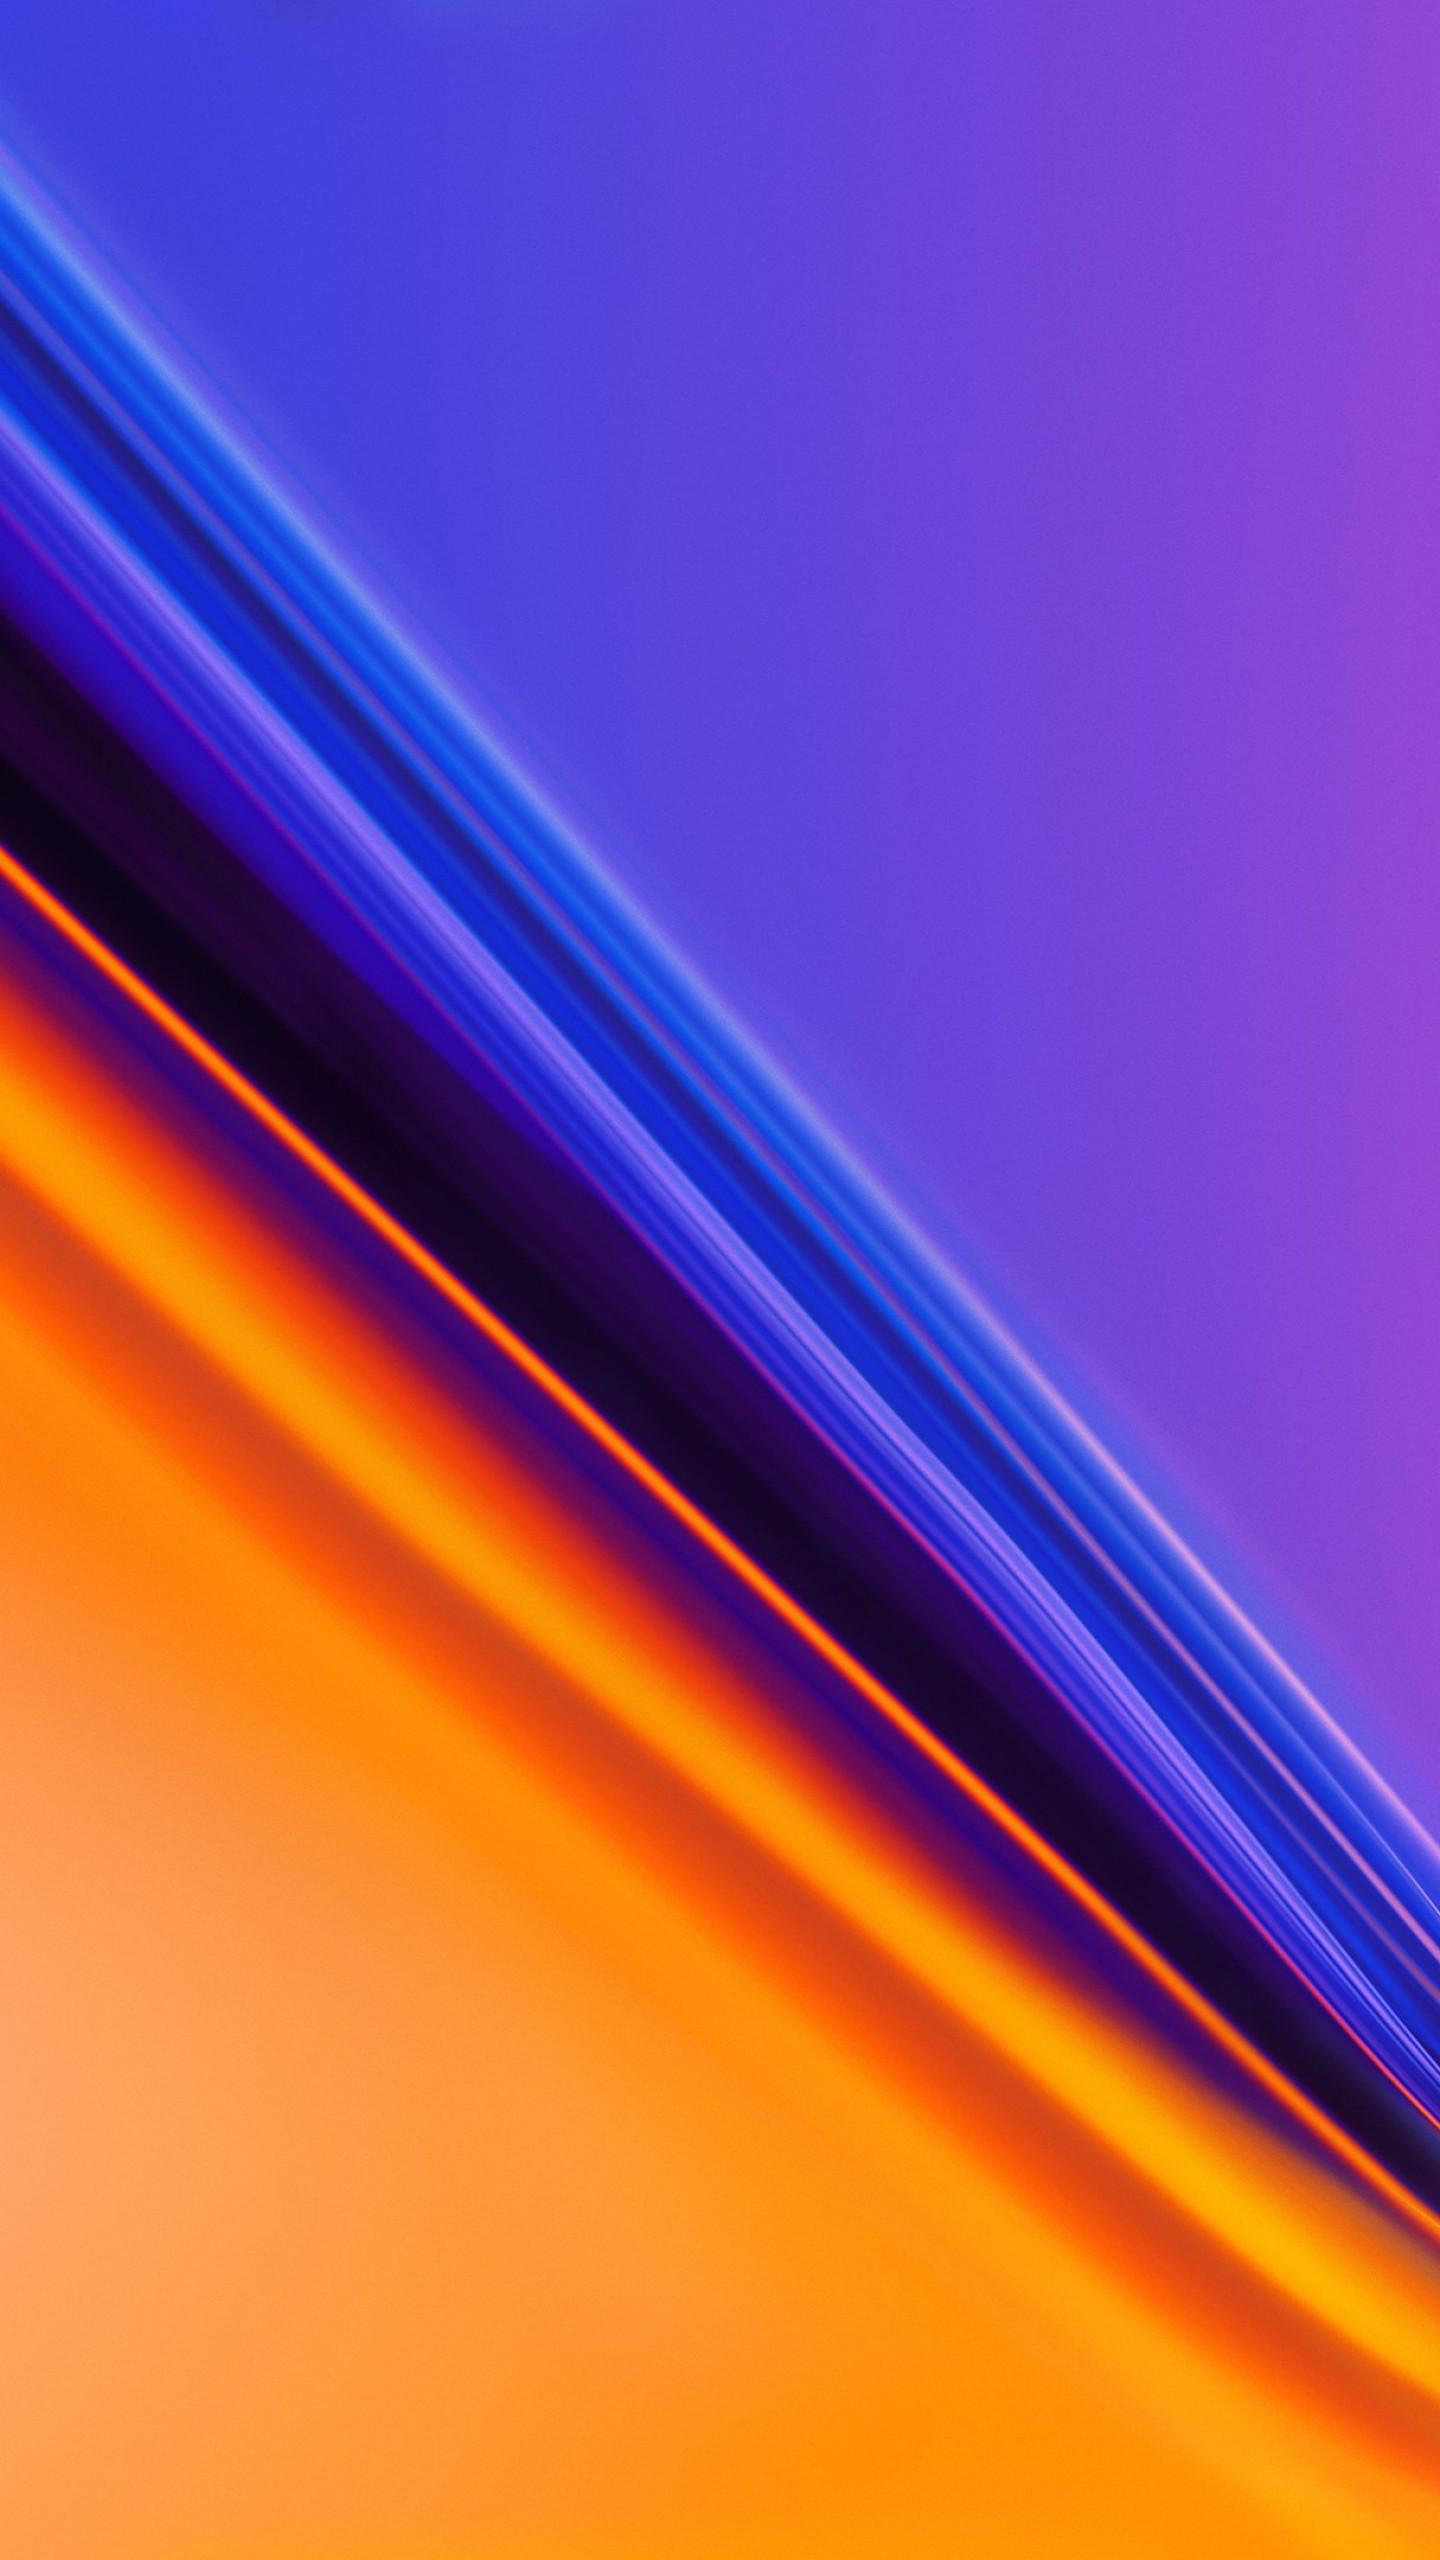 One Plus 7 Wallpapers